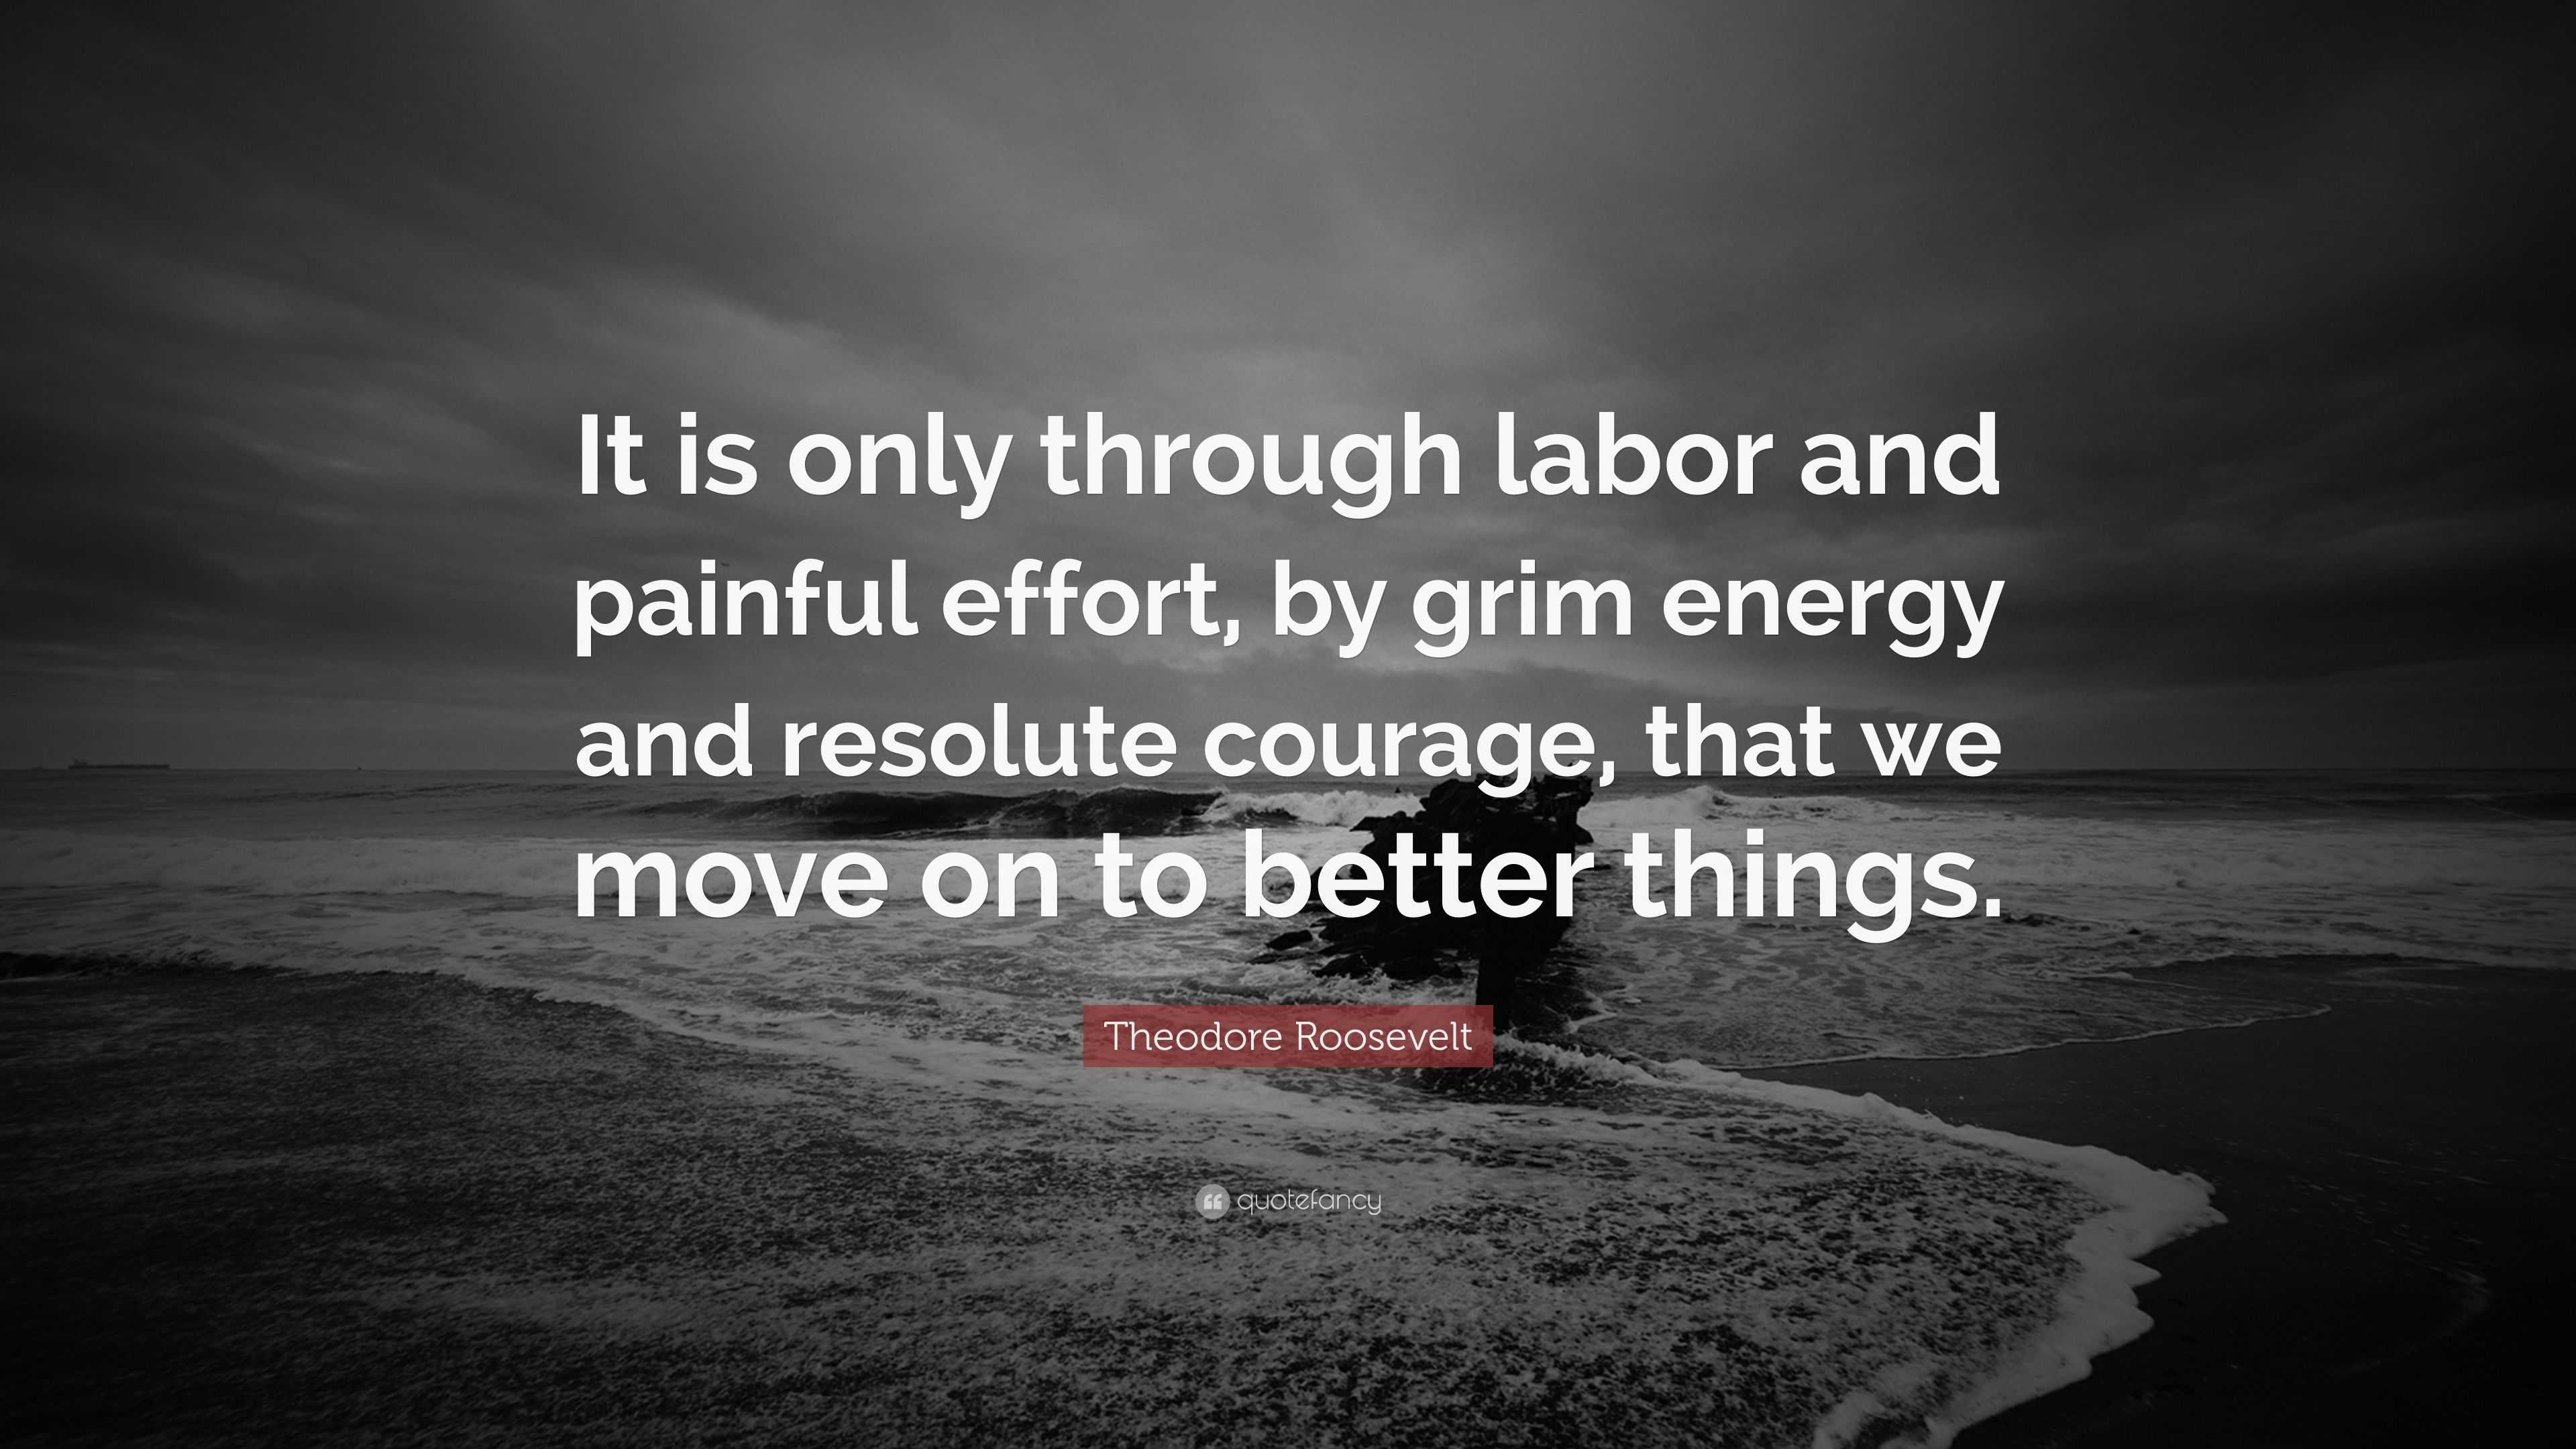 Theodore Roosevelt Quote: “It is only through labor and painful effort ...